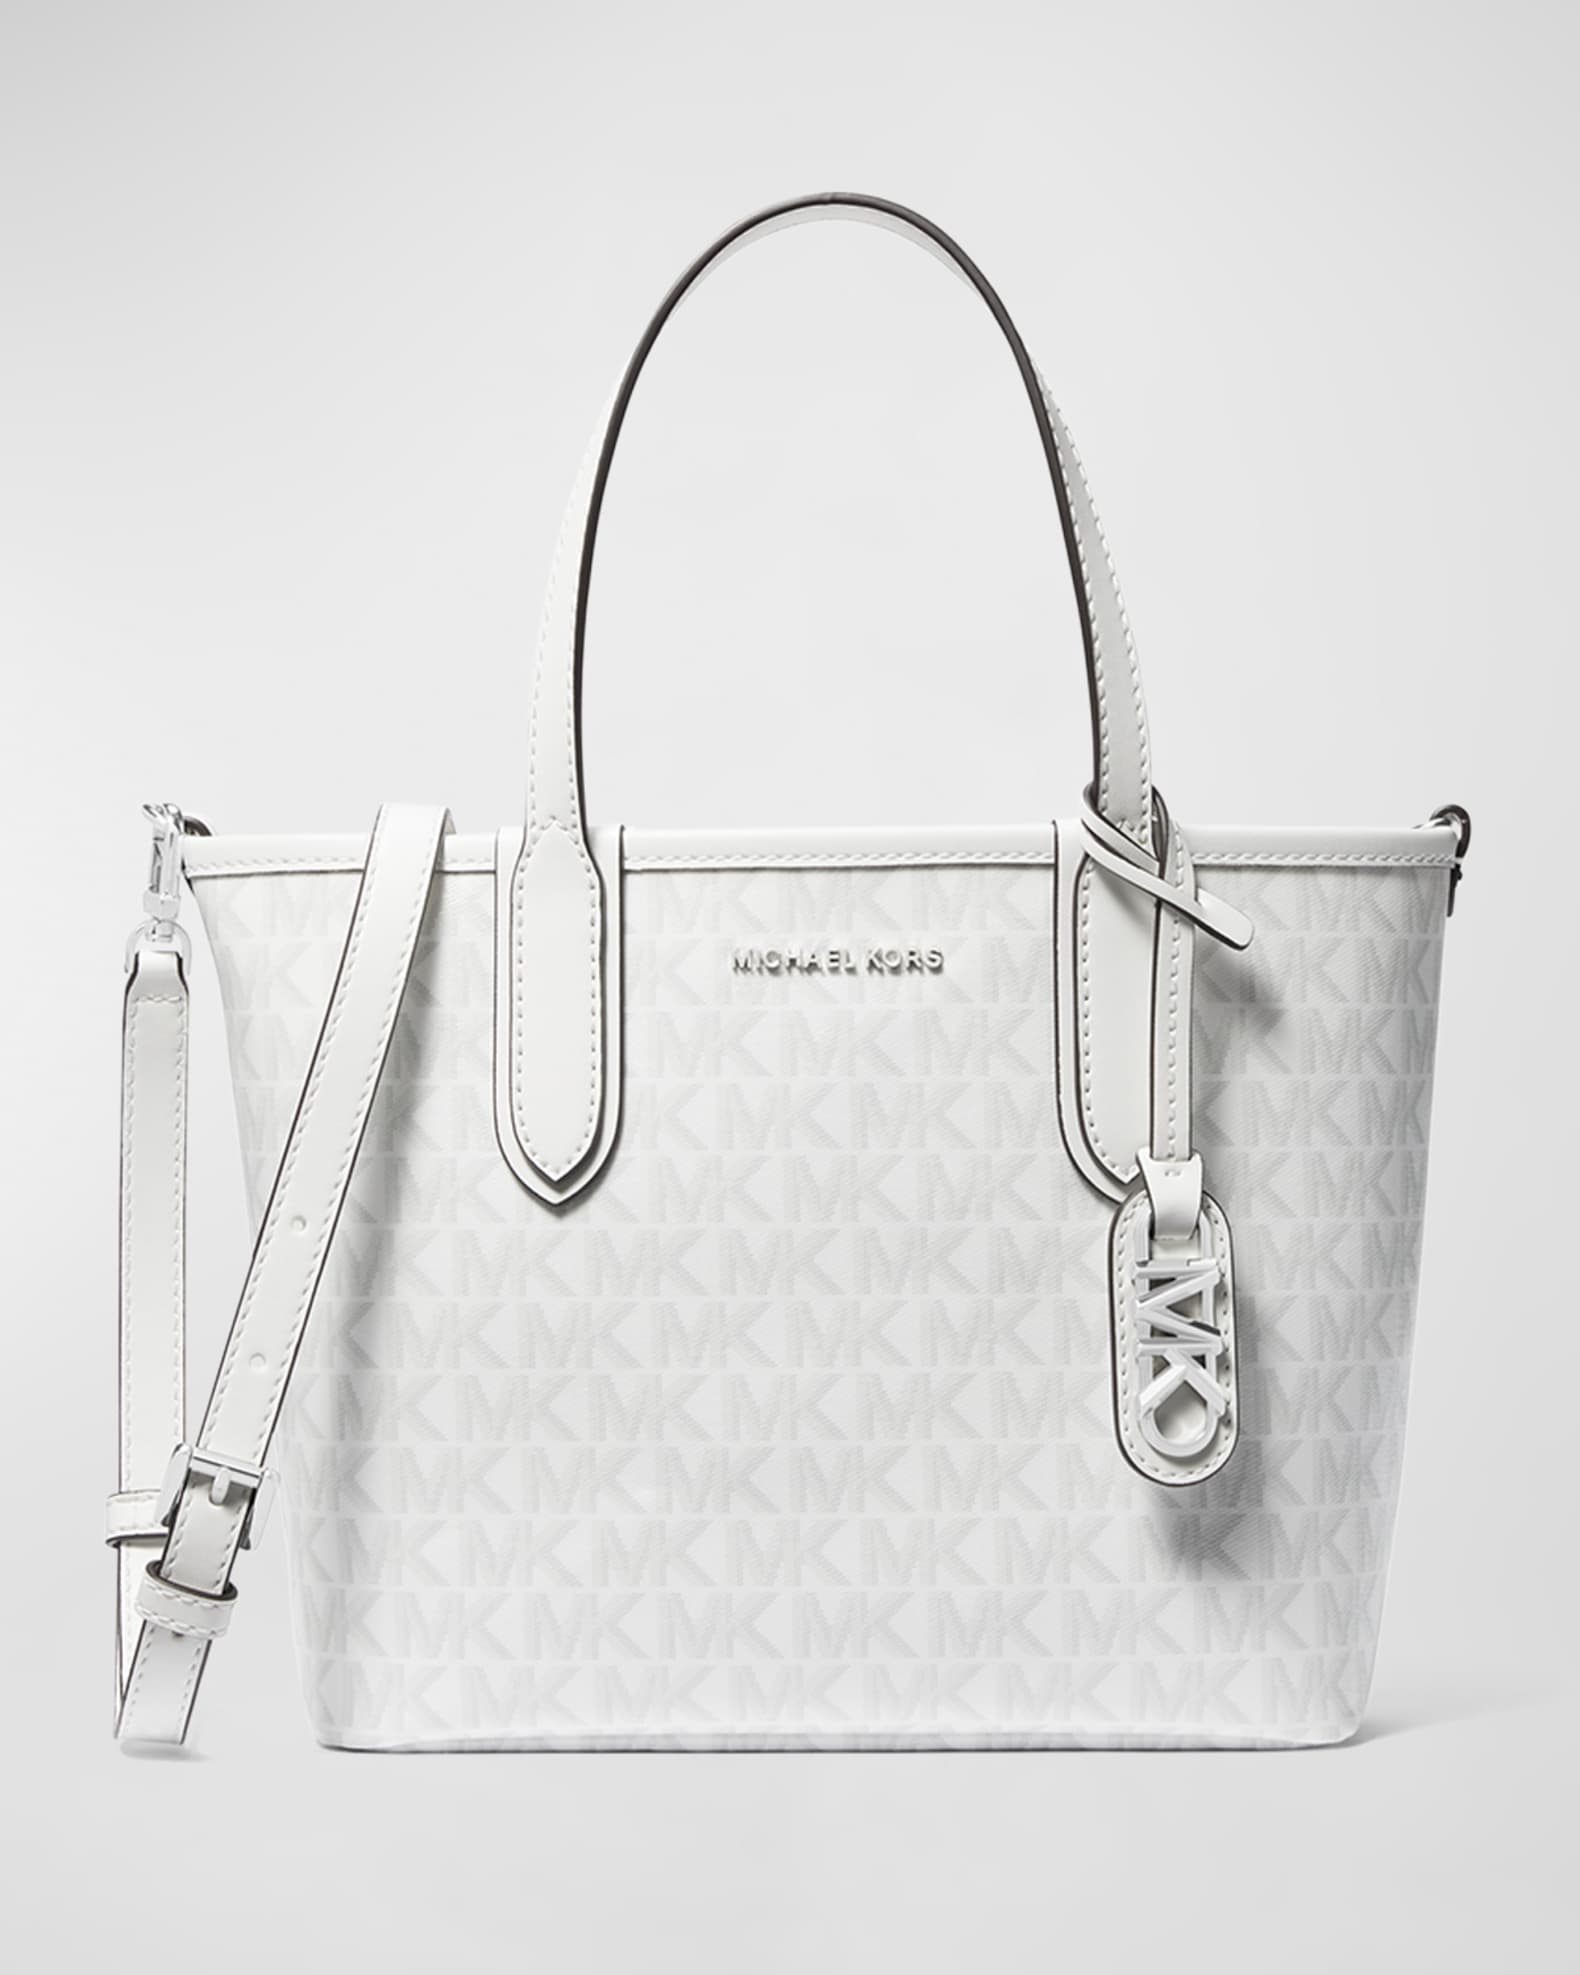 Michael Kors Eliza Extra Small East West Open Tote Bag